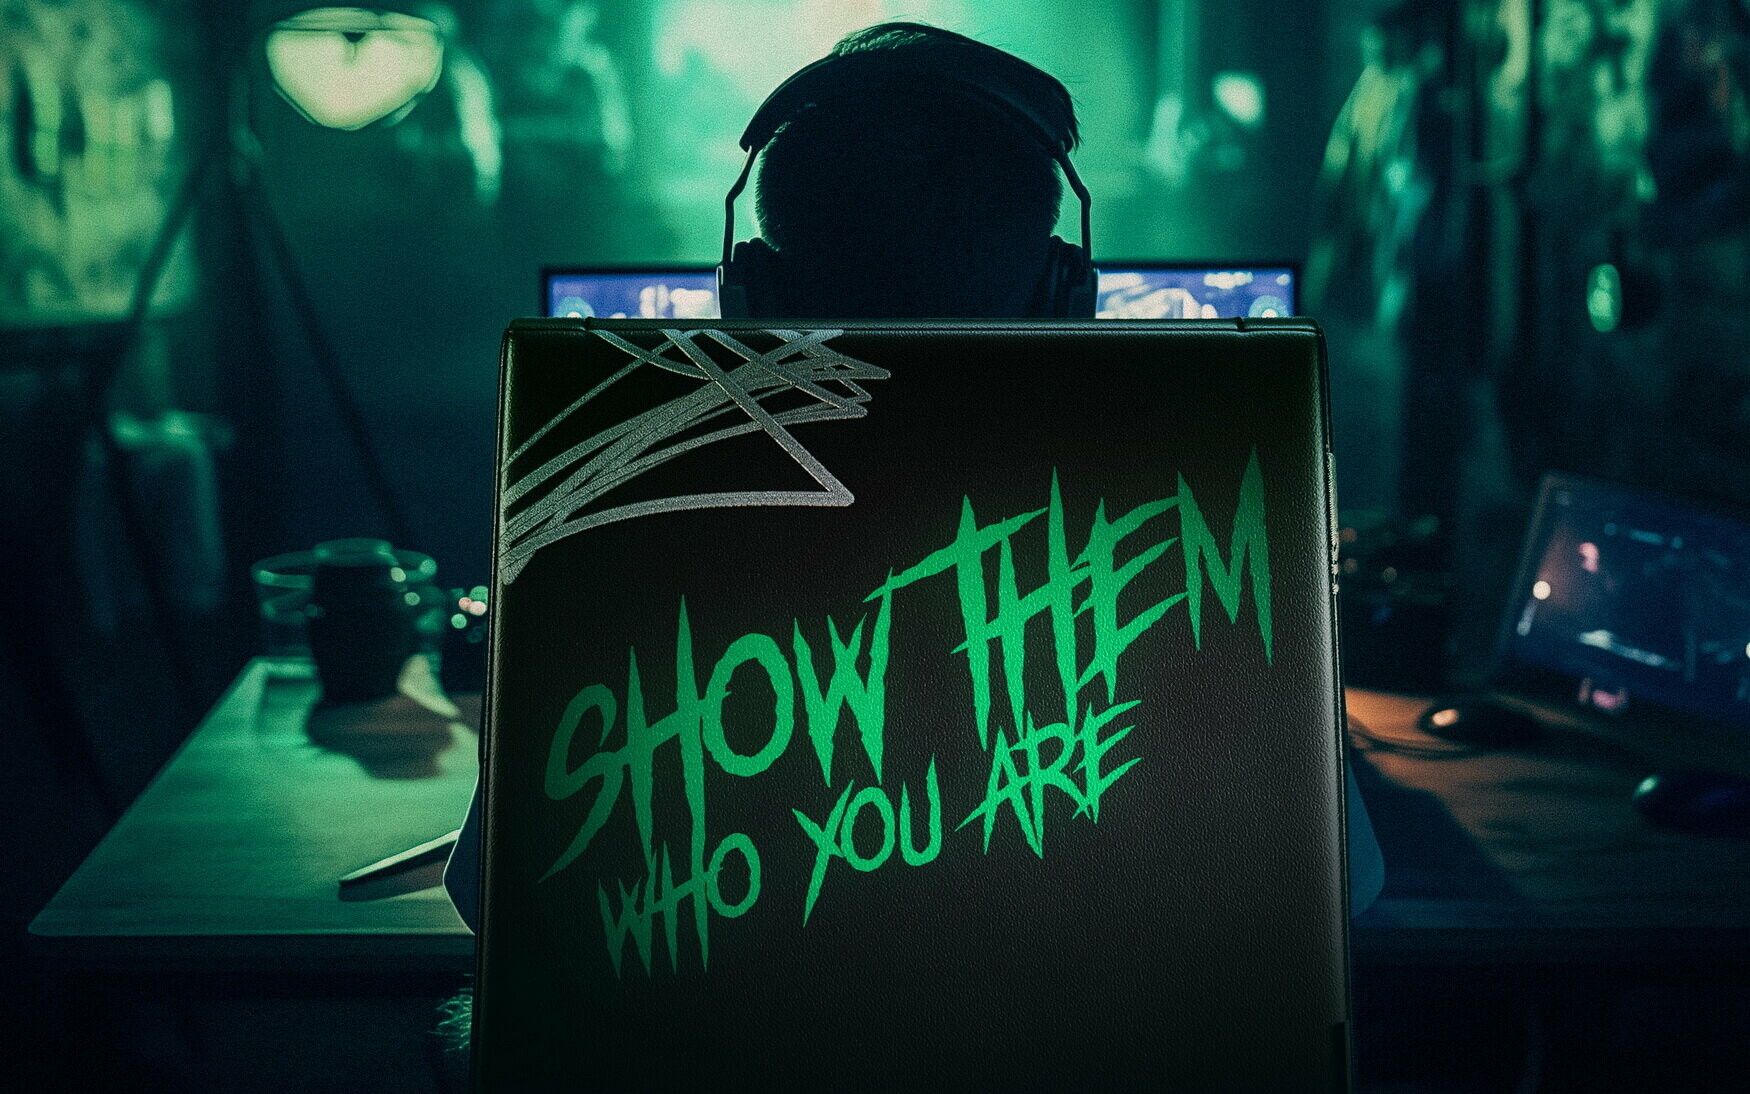 Show them who you are